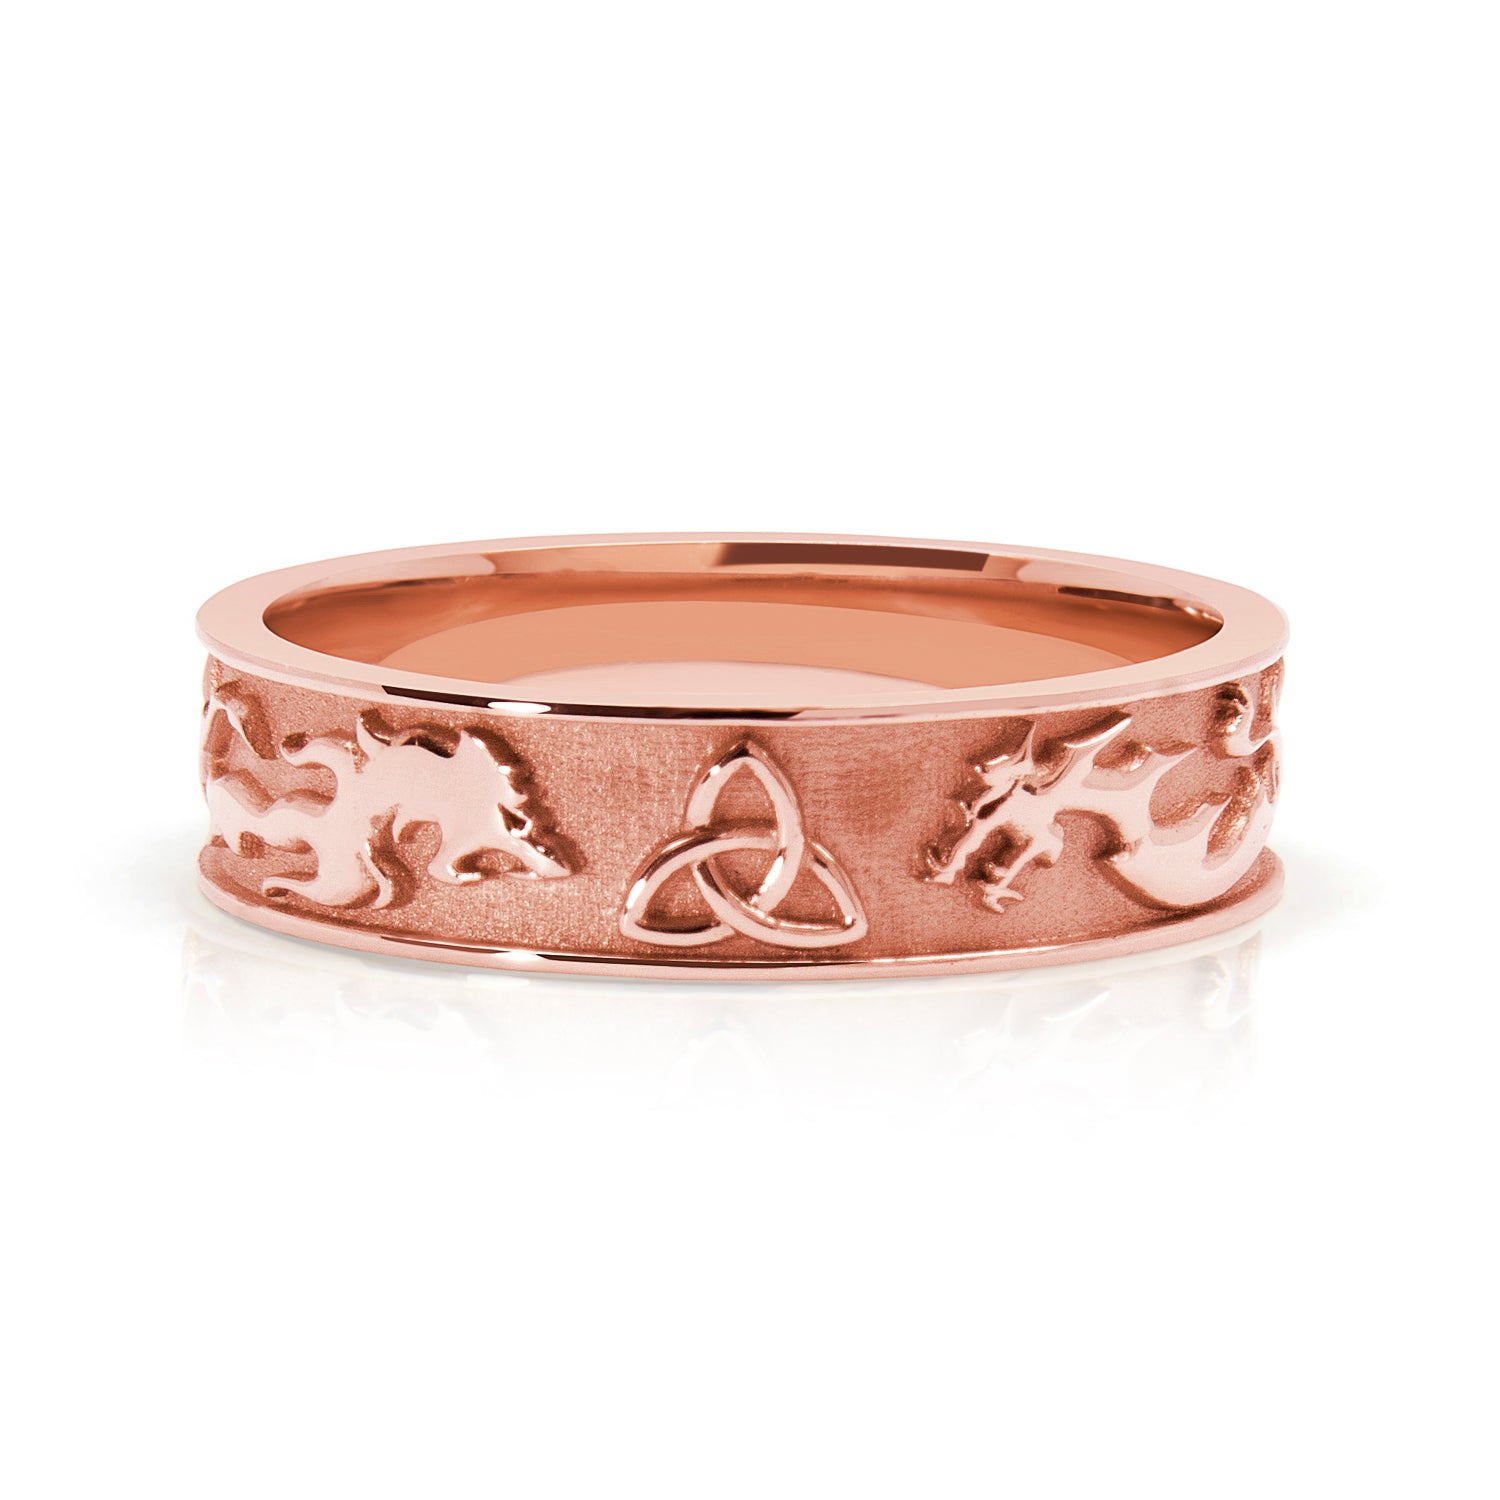 Bespoke Wedding Ring - Fairtrade rose gold with lion, dragon and Celtic Trinity Knot engraving